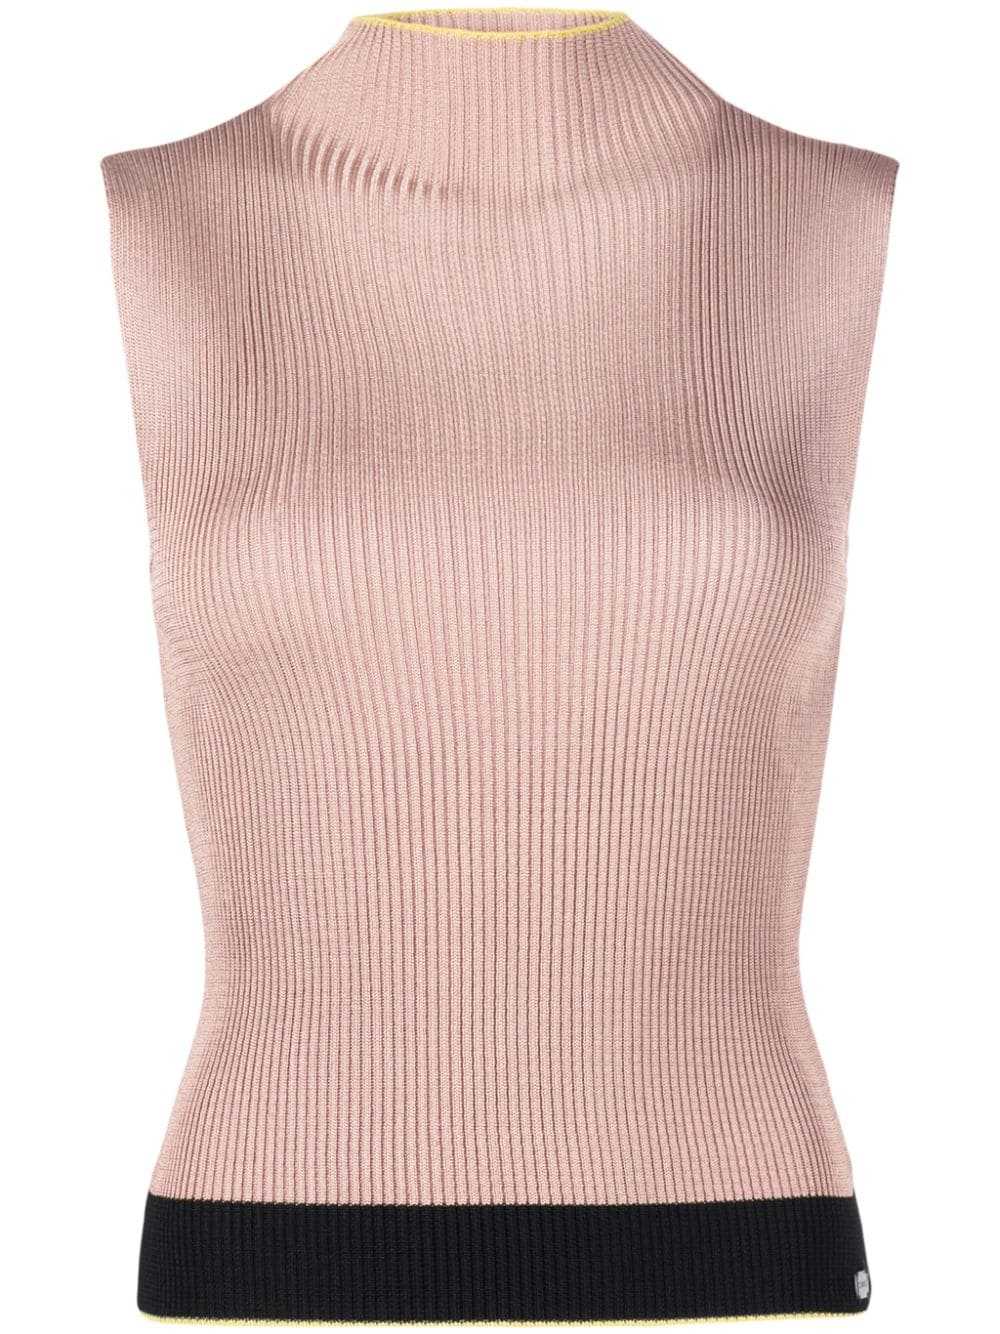 CHANEL Pre-Owned 1999 sleeveless ribbed top - Pink - image 1